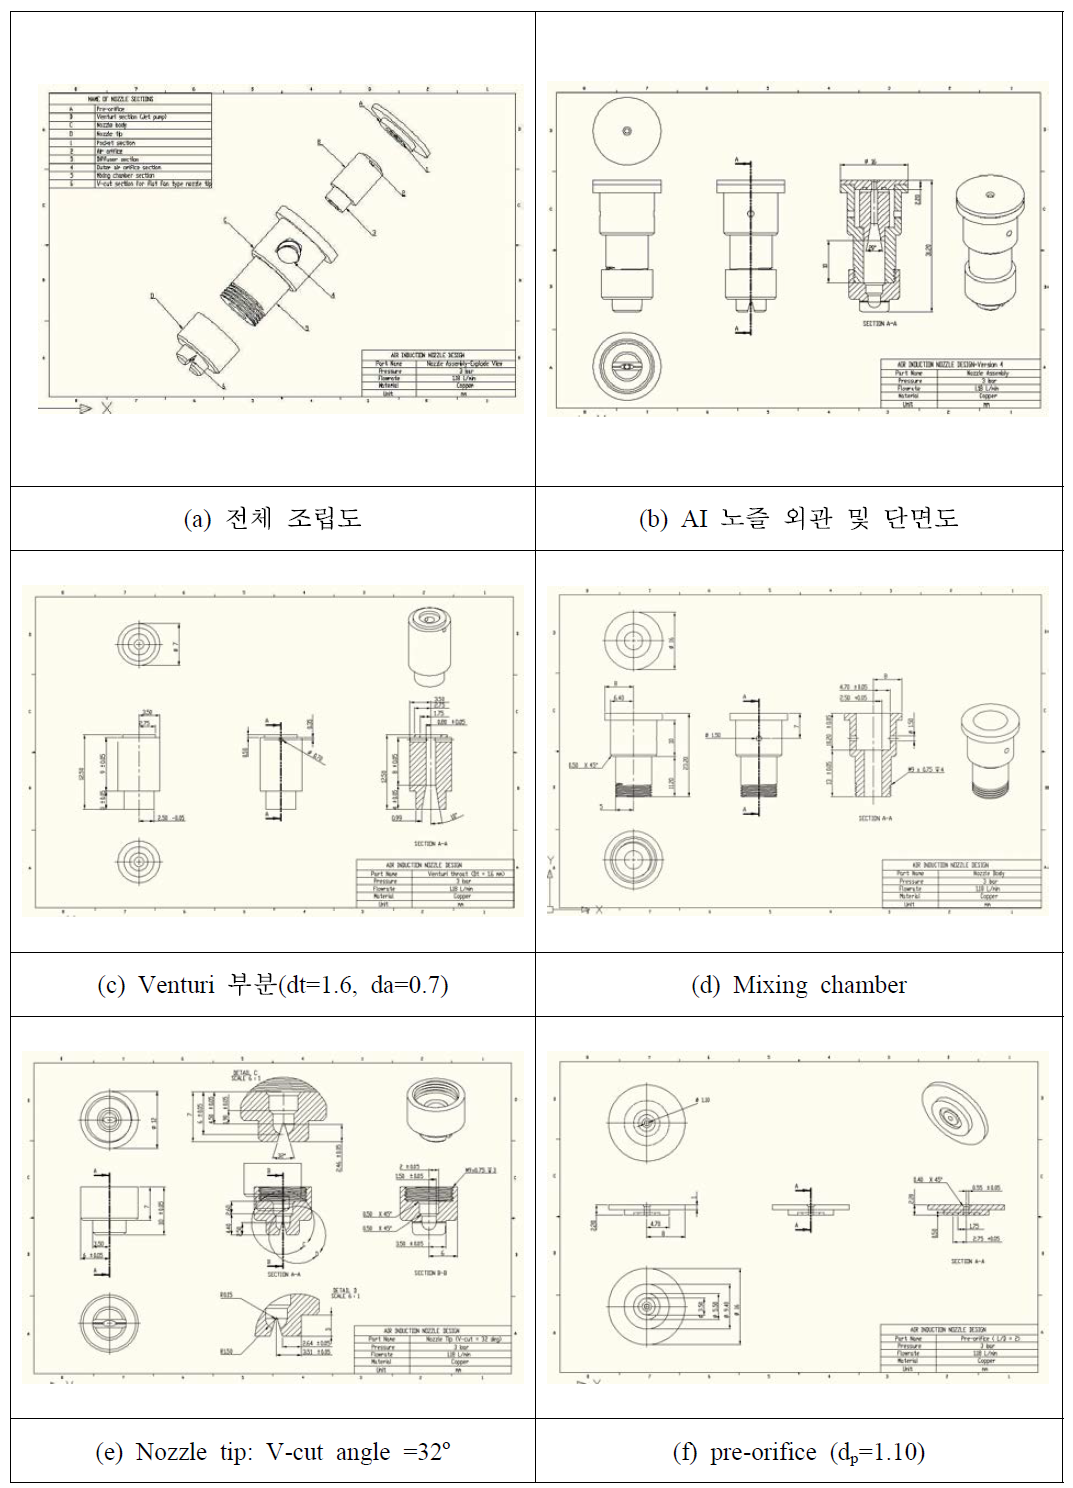 Drawings of 4th version AI nozzle